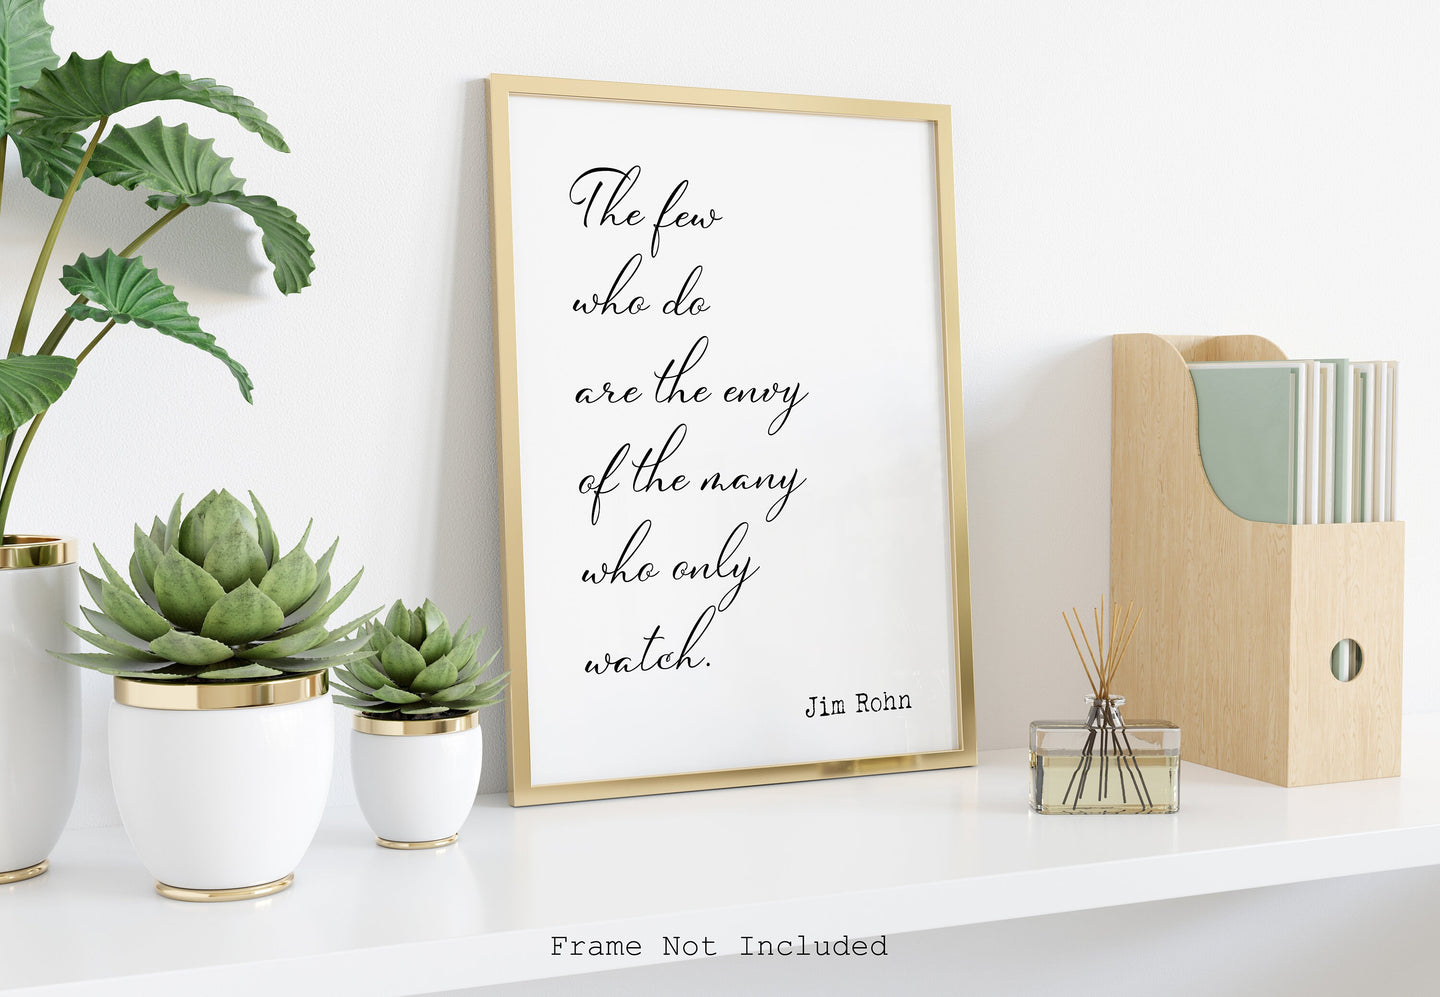 Jim Rohn Print - The few who do are the envy of the many who only watch - Inspirational poster - Motivational quote UNFRAMED